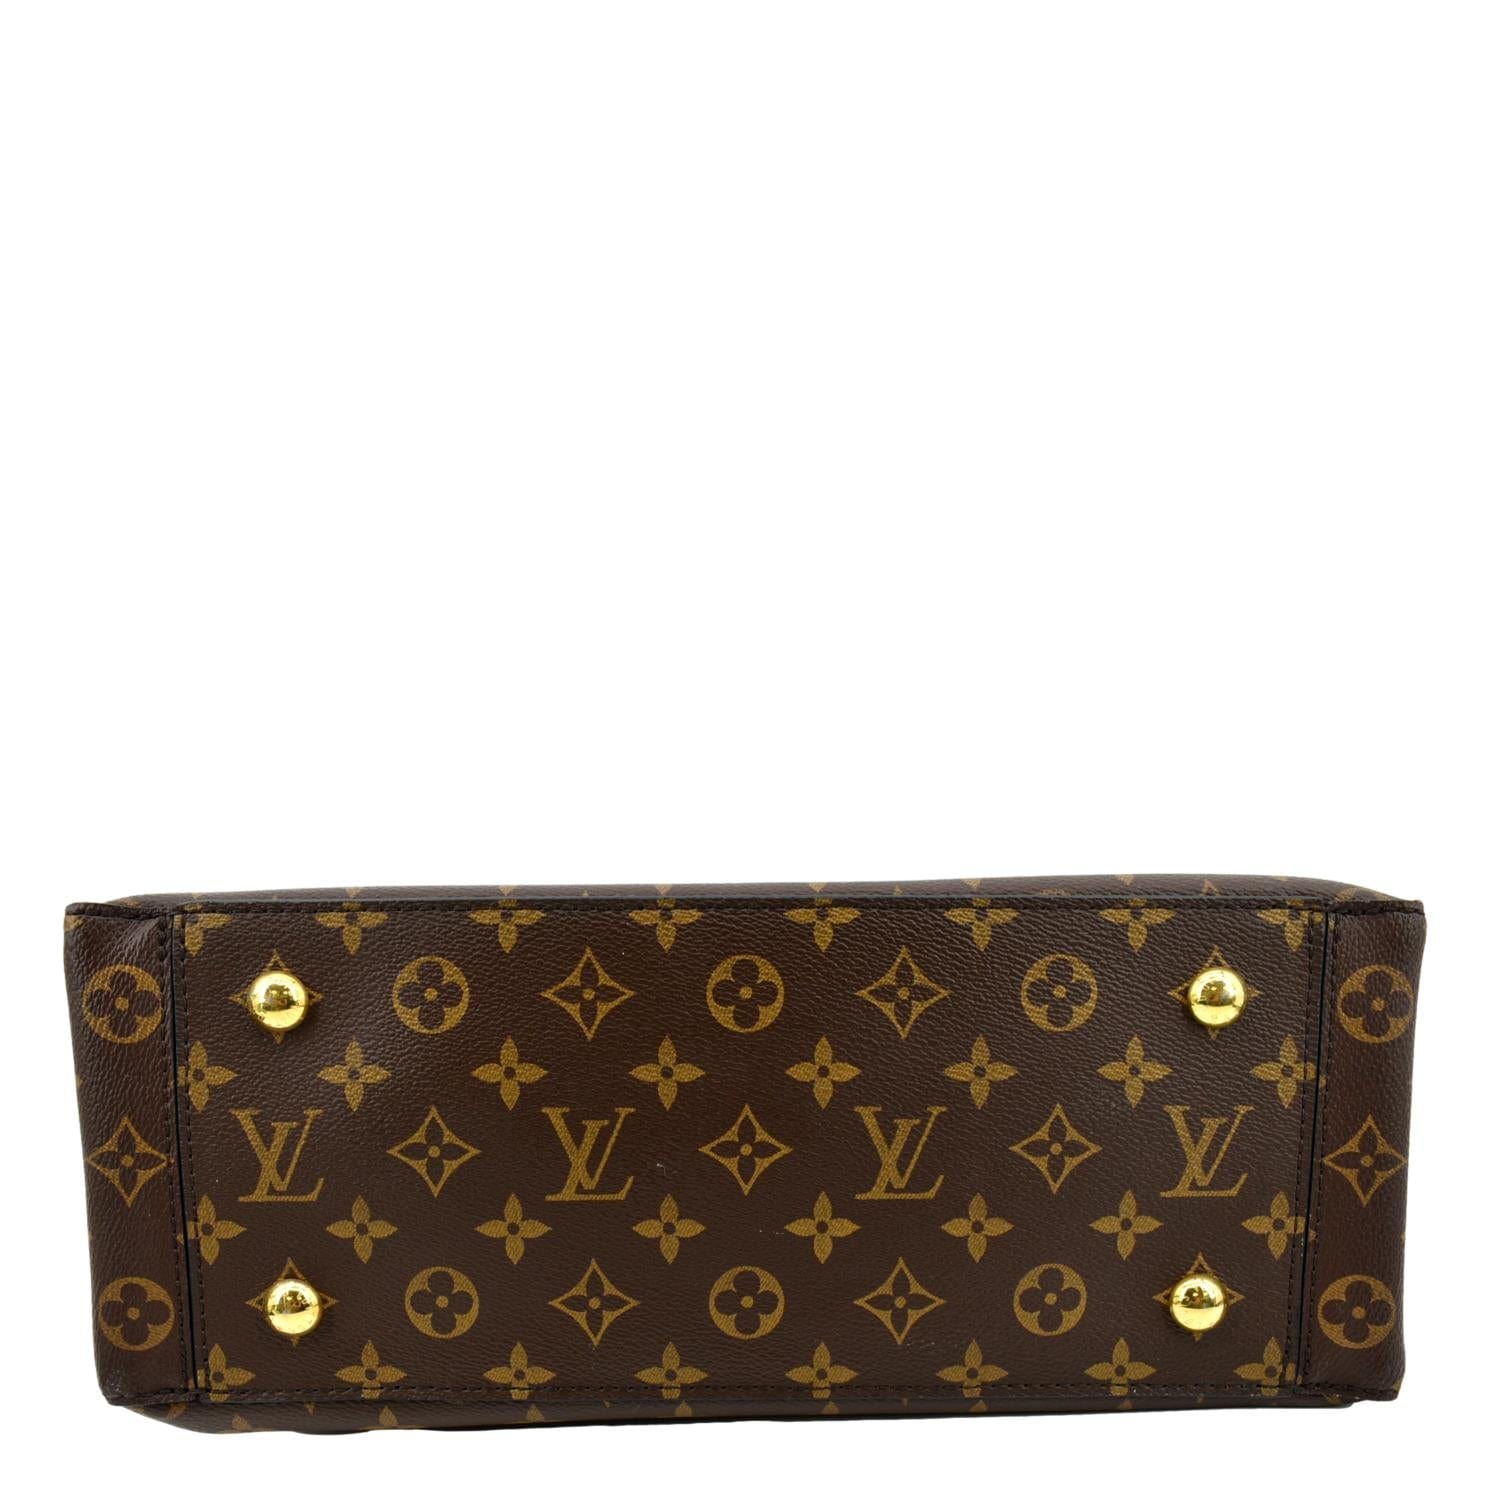 Download Louis Vuitton Fabric By Sassy_sassy On Spoonflower